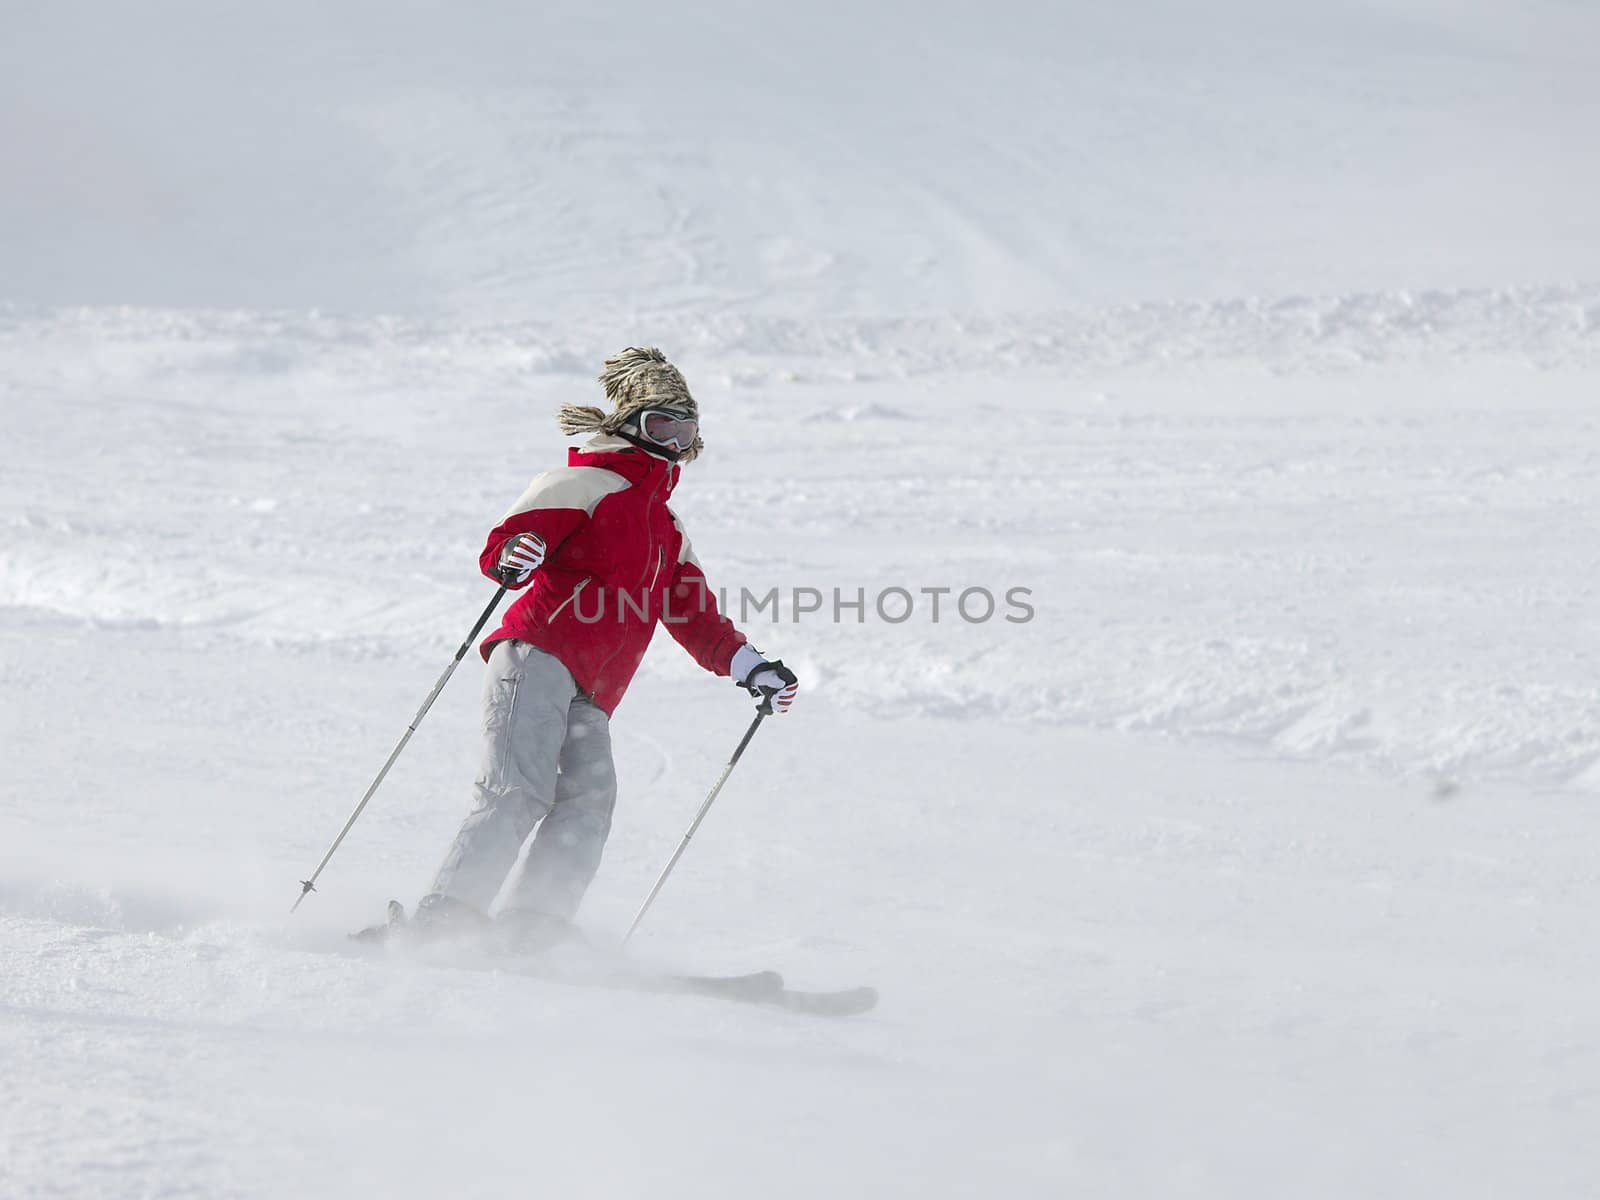 Skier coming down the slope fast